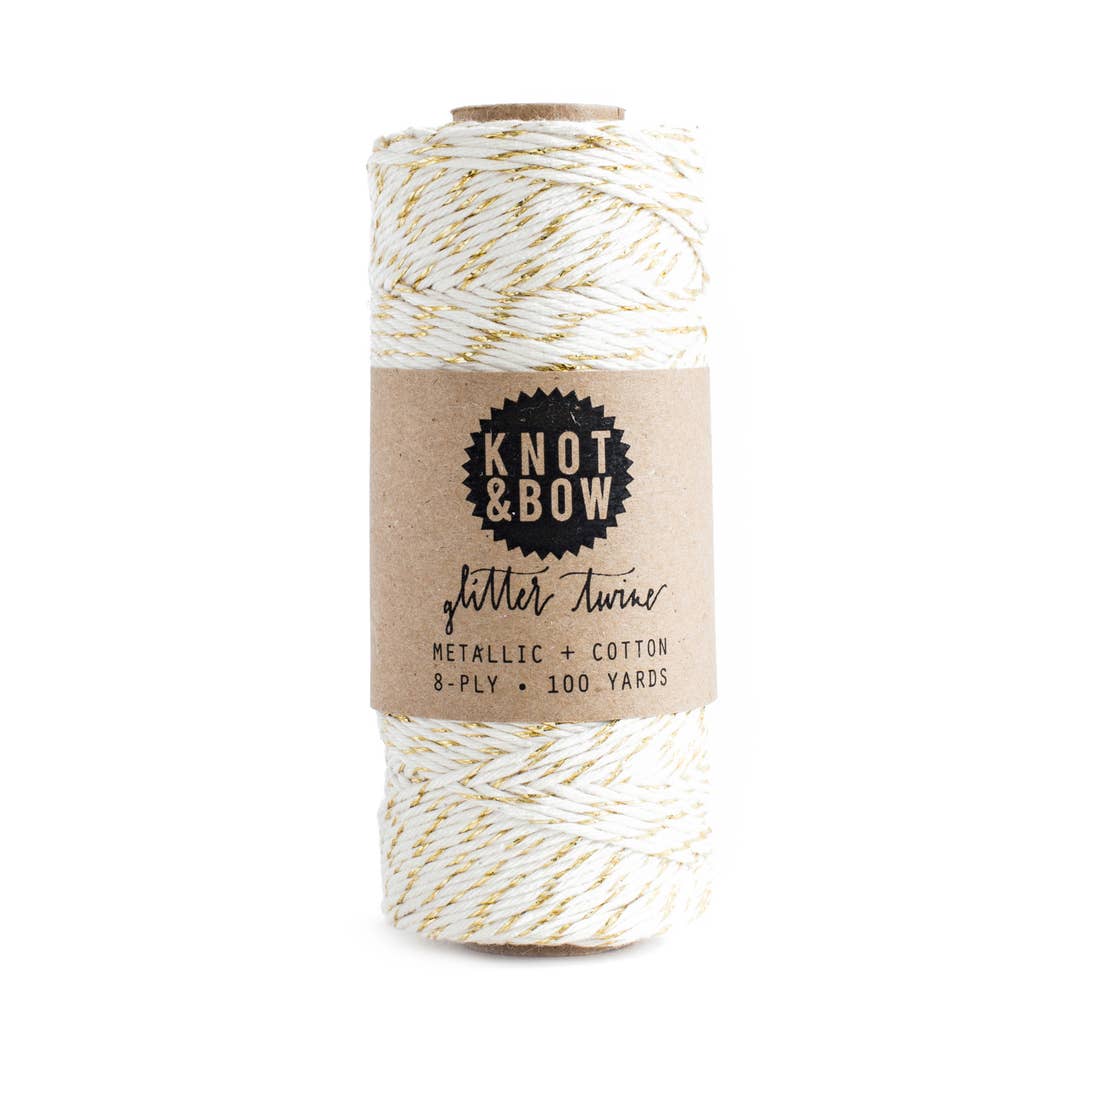 Glitter Twine by Knot & Bow